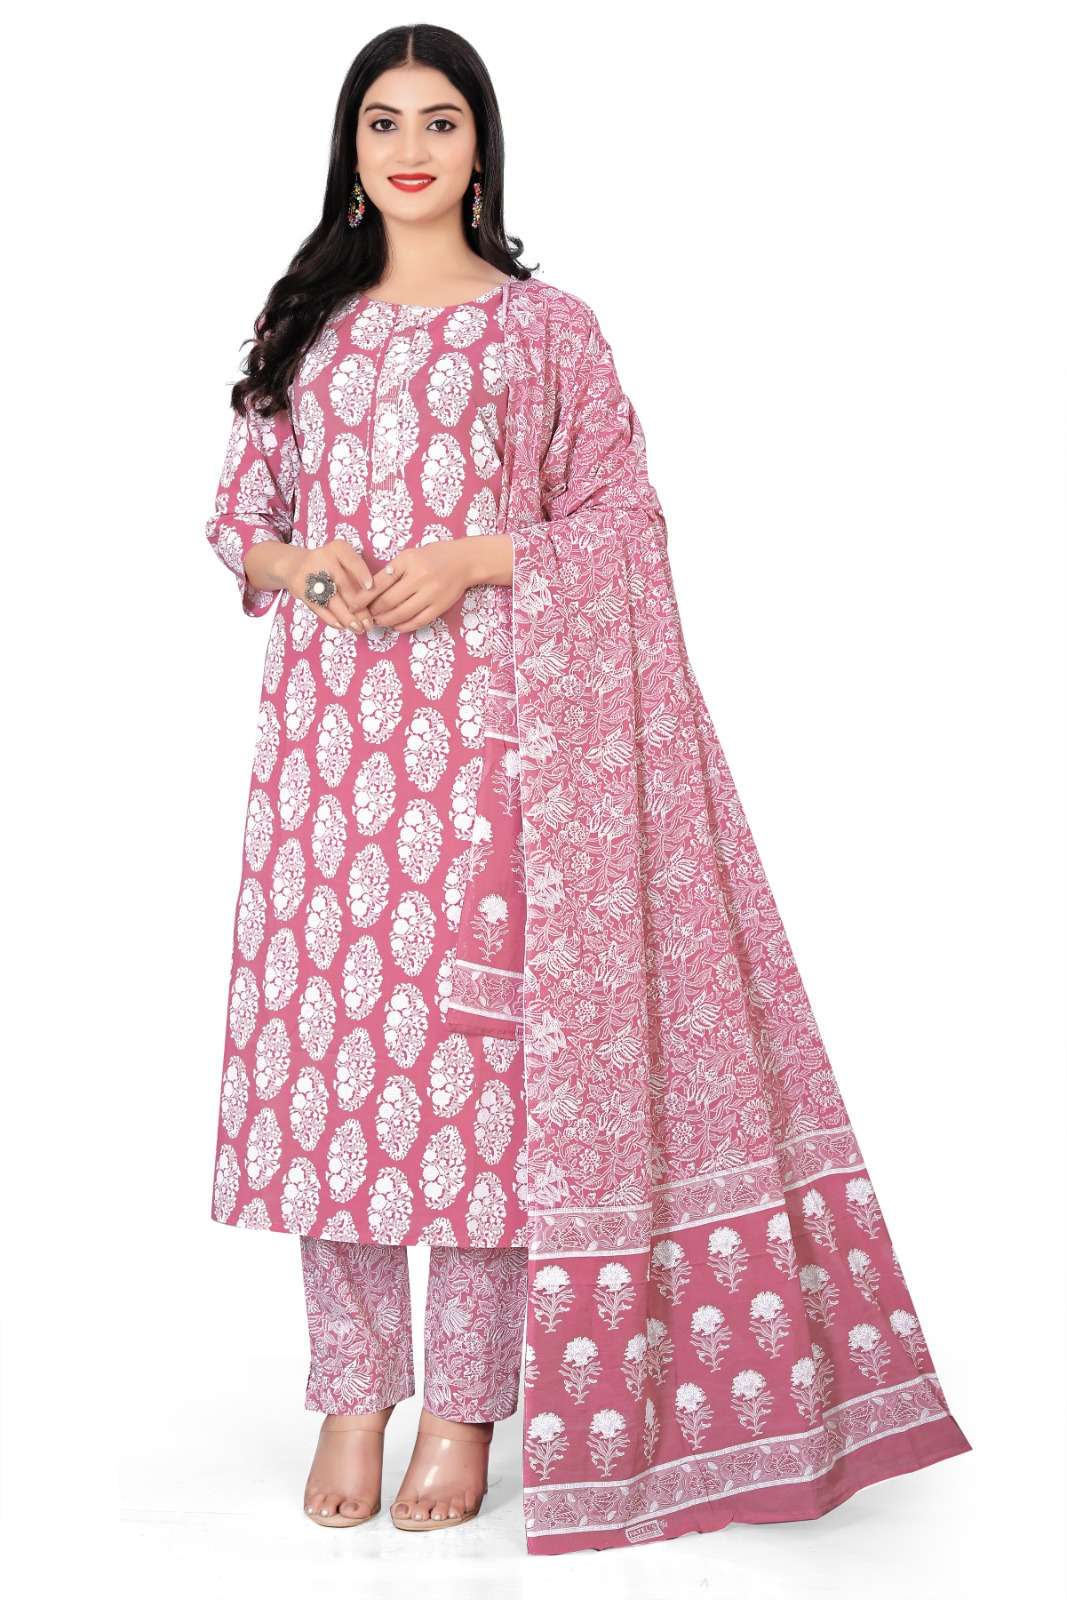 partywear official western wear traditional look fabric pure cotton package contains kurti pent dupatta size m to xl pure cotton readymade kurtie 